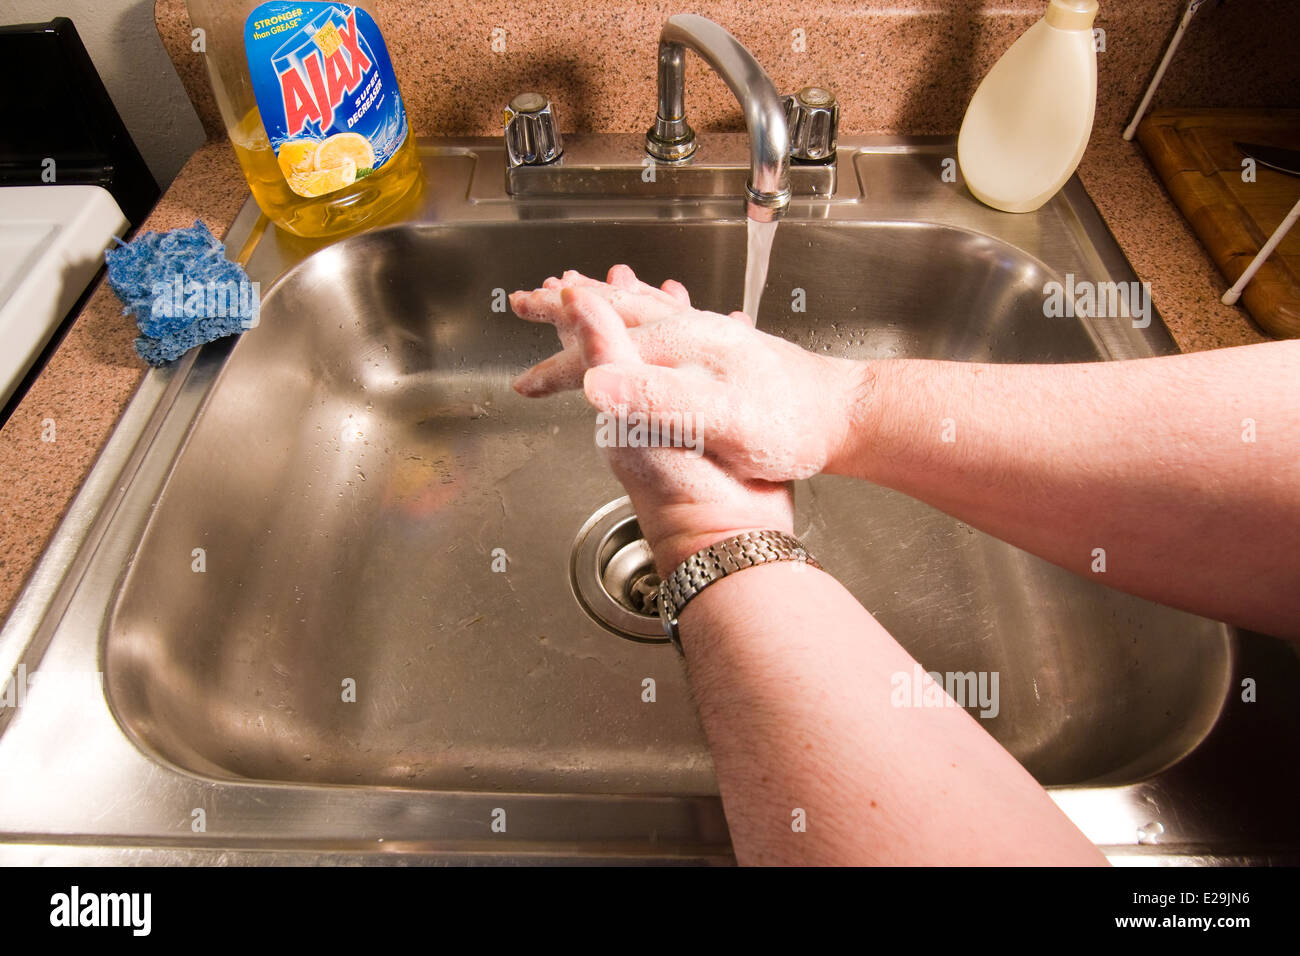 Soap bubbles covering a man's hands as he washes them in a sink Stock Photo